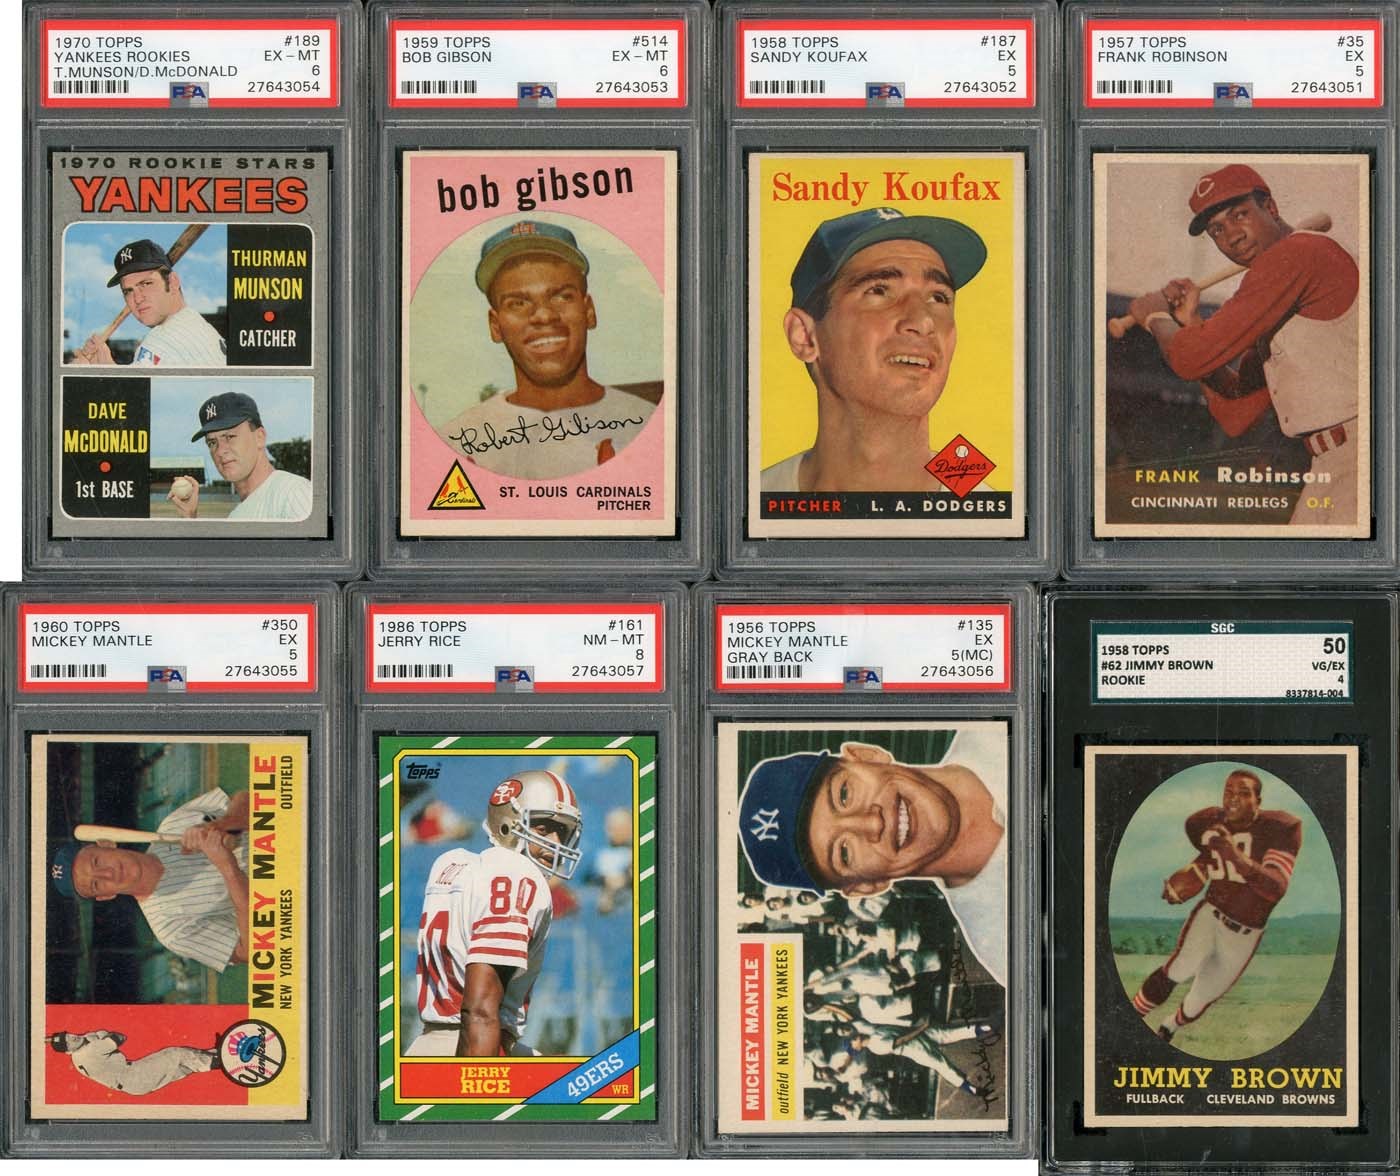 - 1956-1986 Topps Multi-Sport HOFer PSA - SGC Graded Collection with Mantle (2) and Jimmy Brown RC!